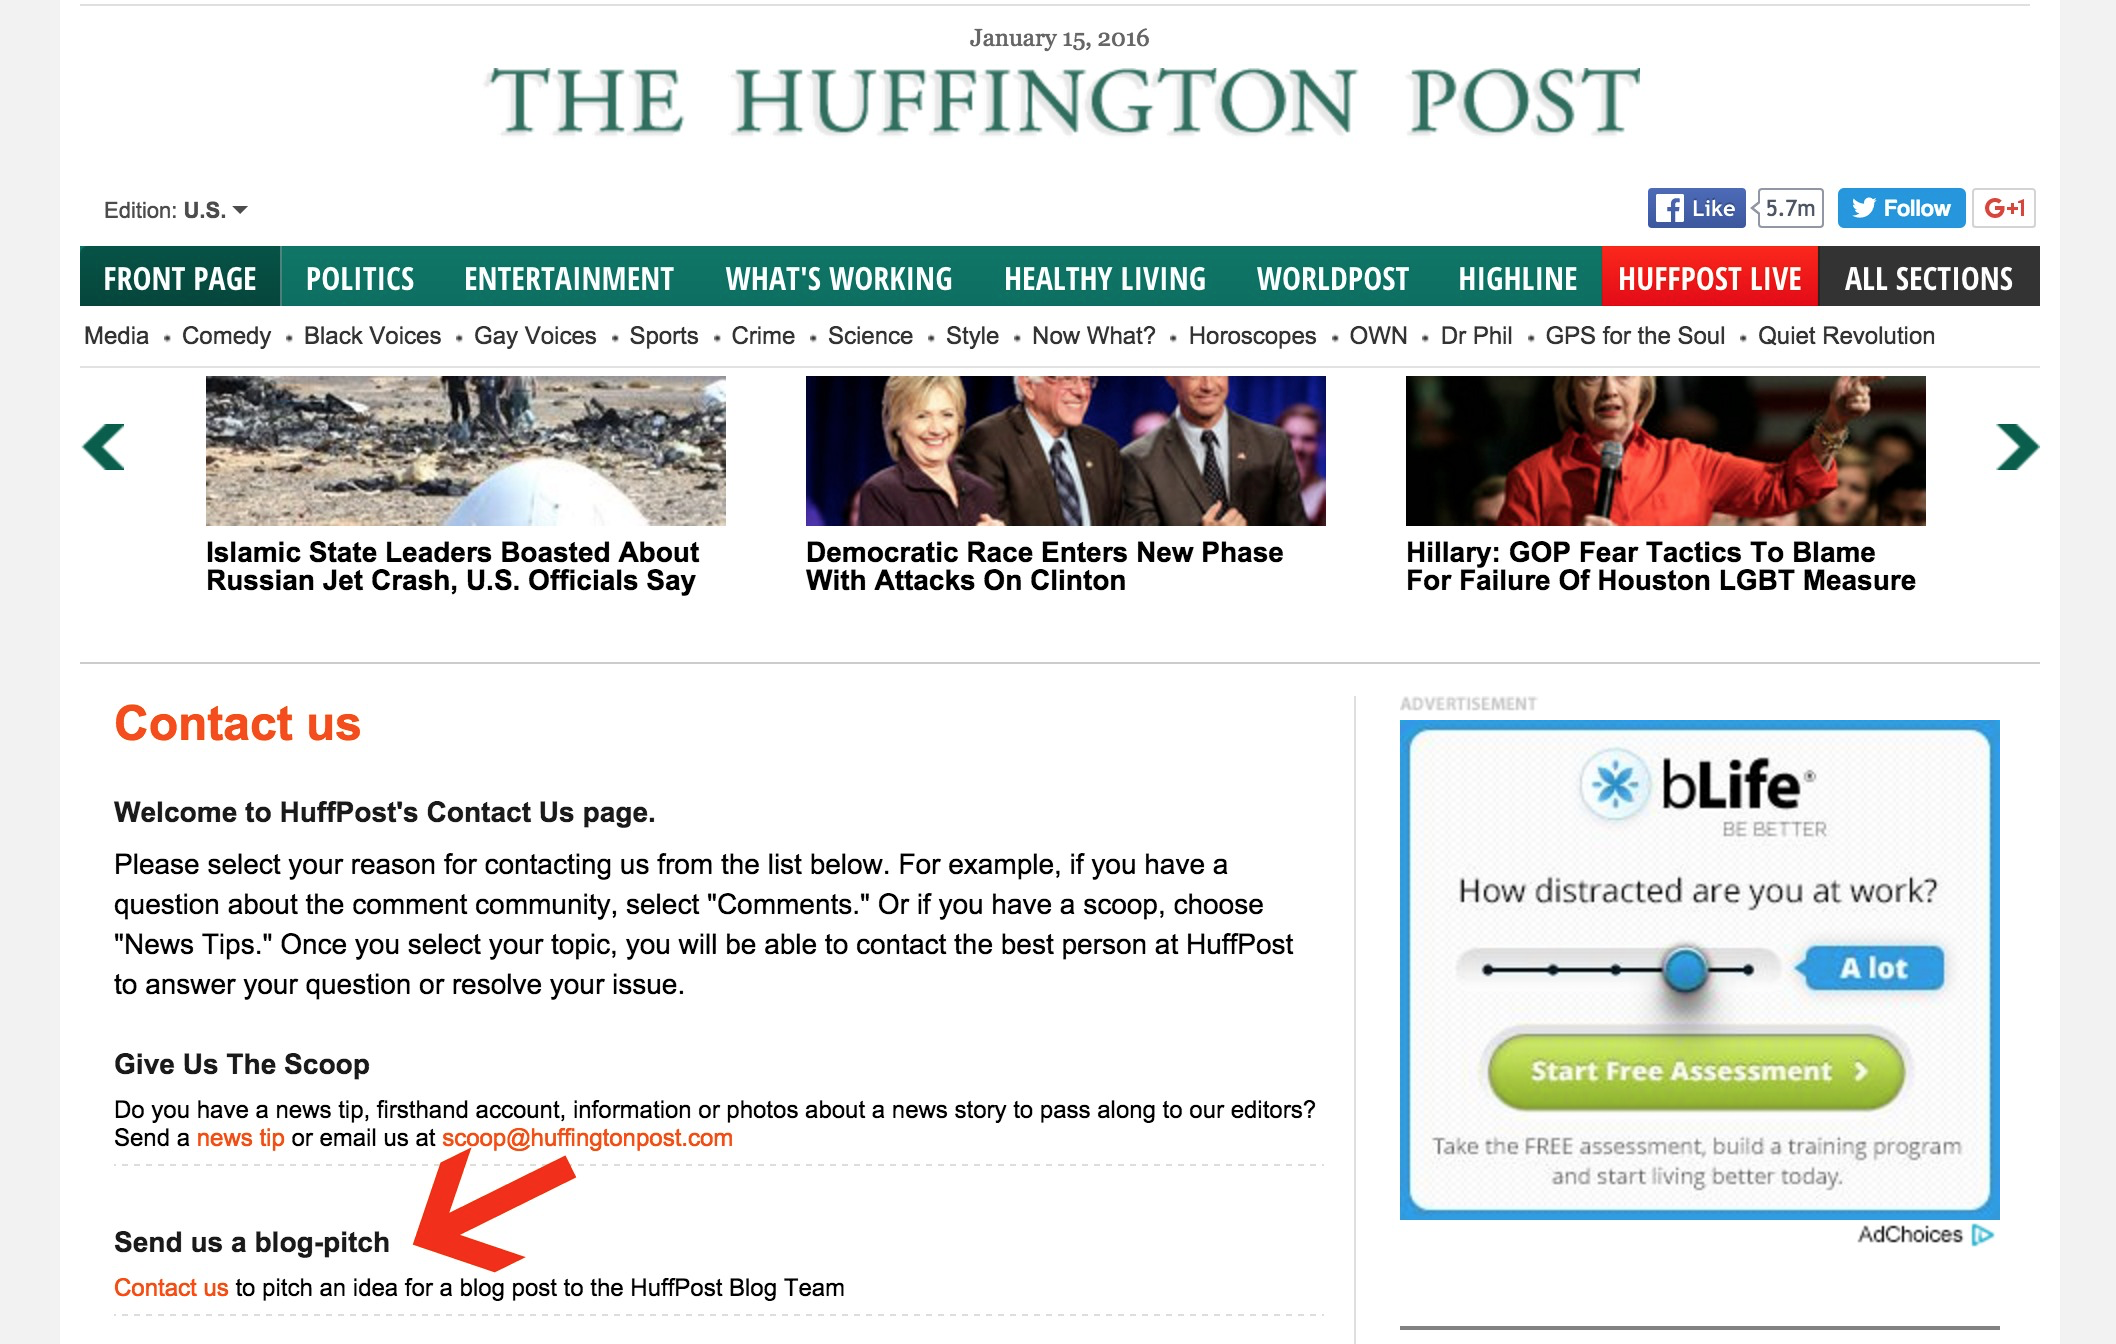 Screenshot of "send us a blog pitch" option on the huffington post